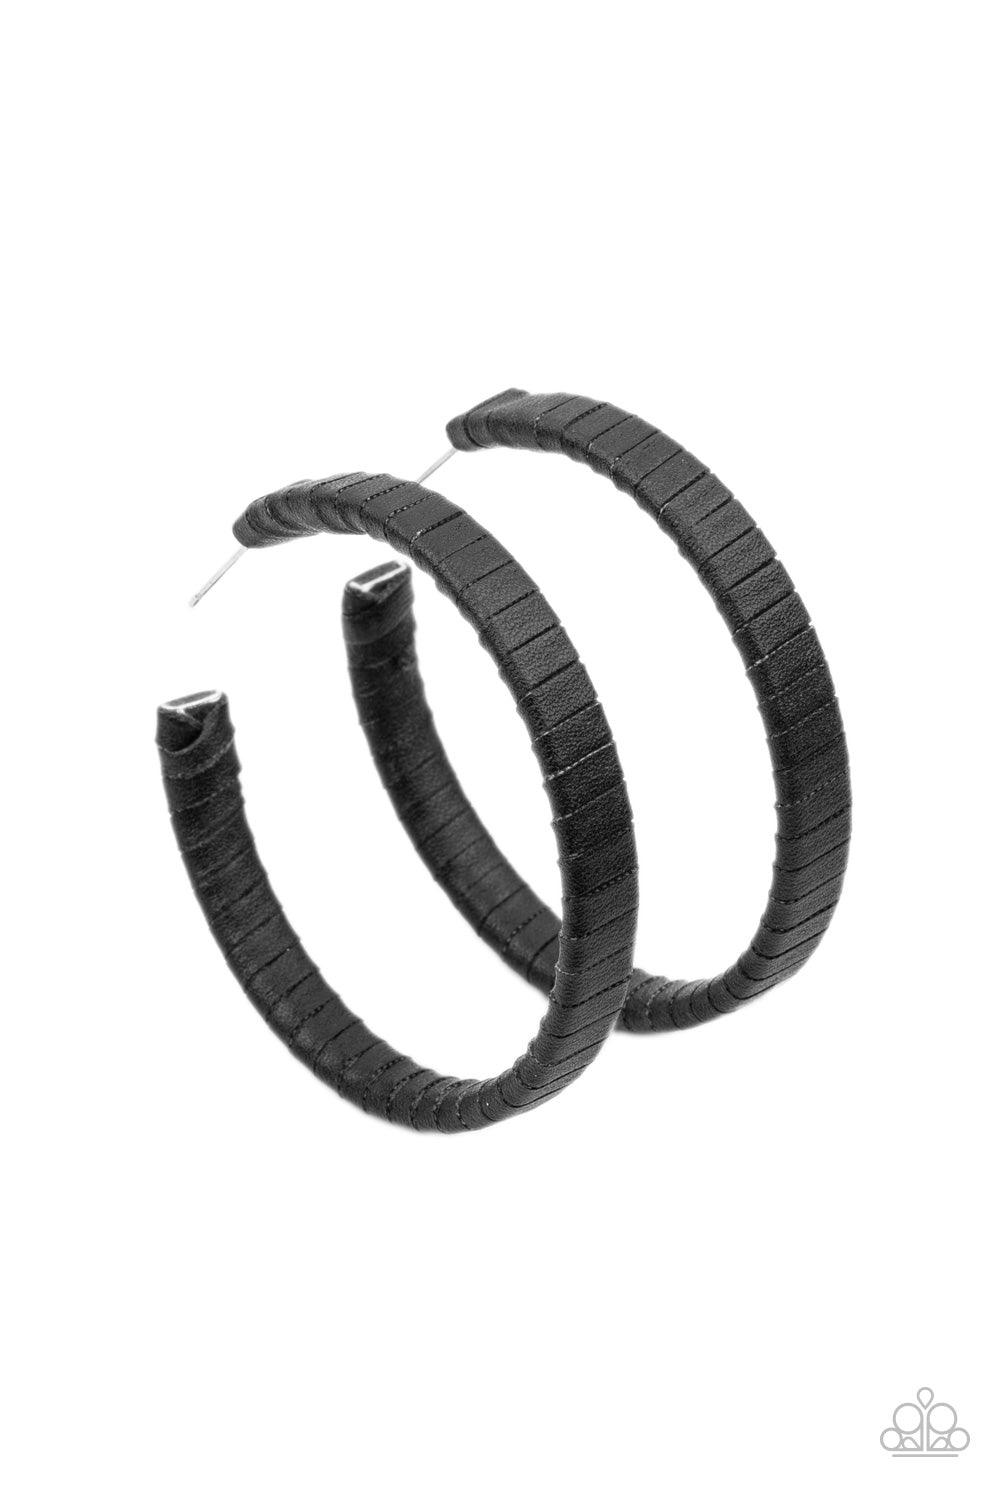 Paparazzi Accessories Leather-Clad Legend - Black A black leather lace wraps around a thick silver hoop, creating an edgy display. Earring attaches to a standard post fitting. Hoop measures approximately 2 1/2" in diameter. Sold as one pair of hoop earrin